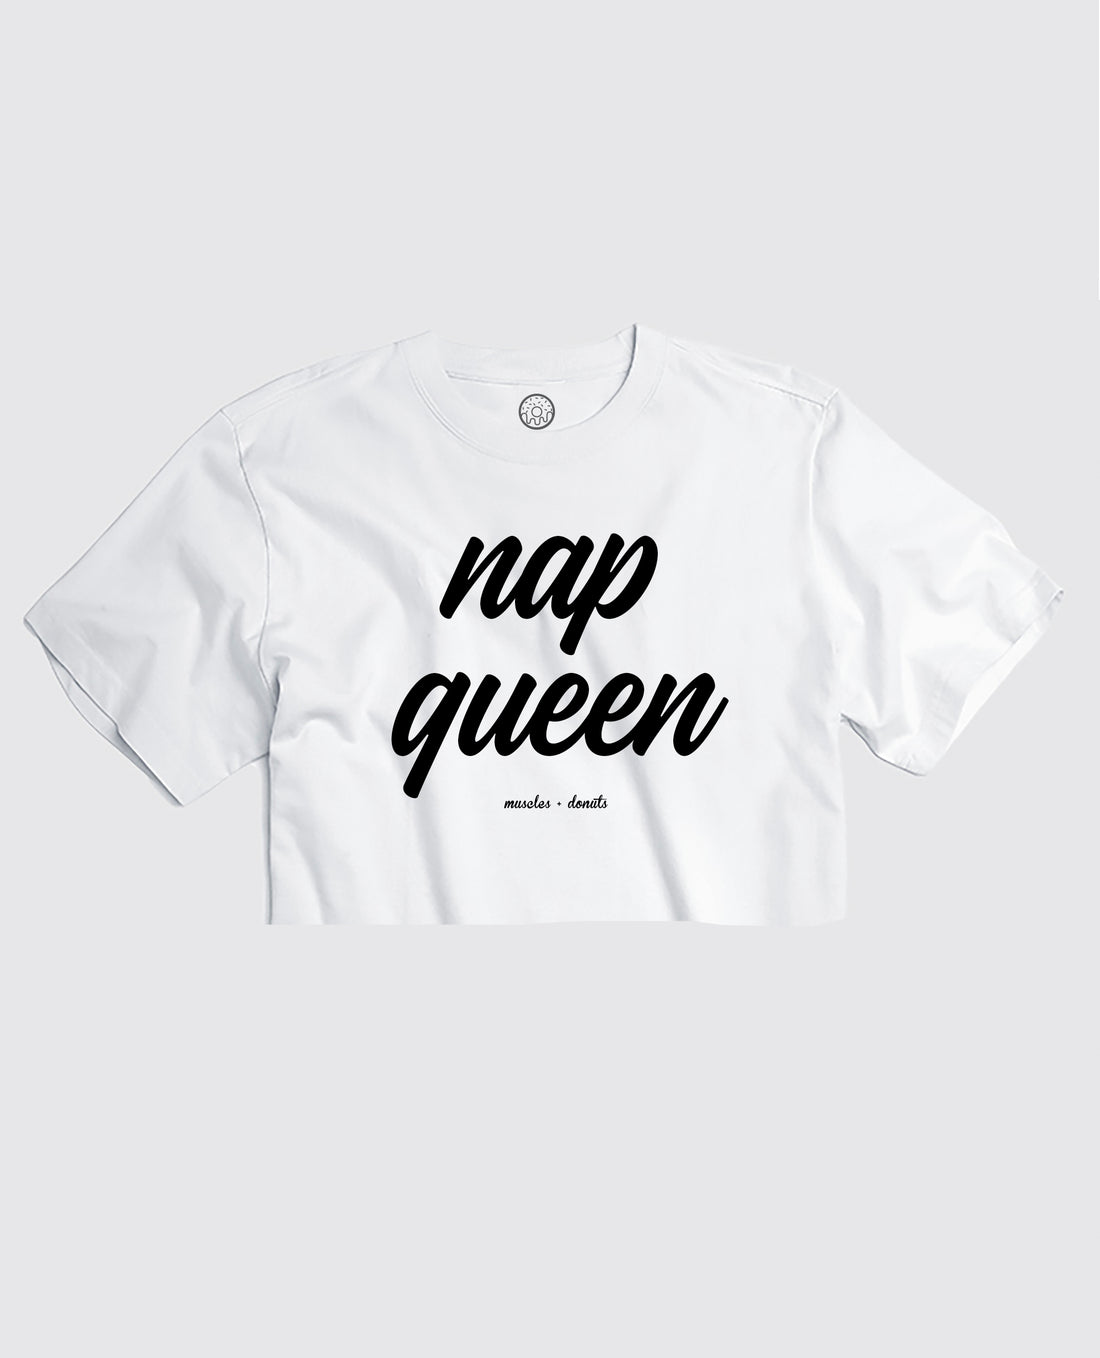 Nap Queen - White Cropped Tee